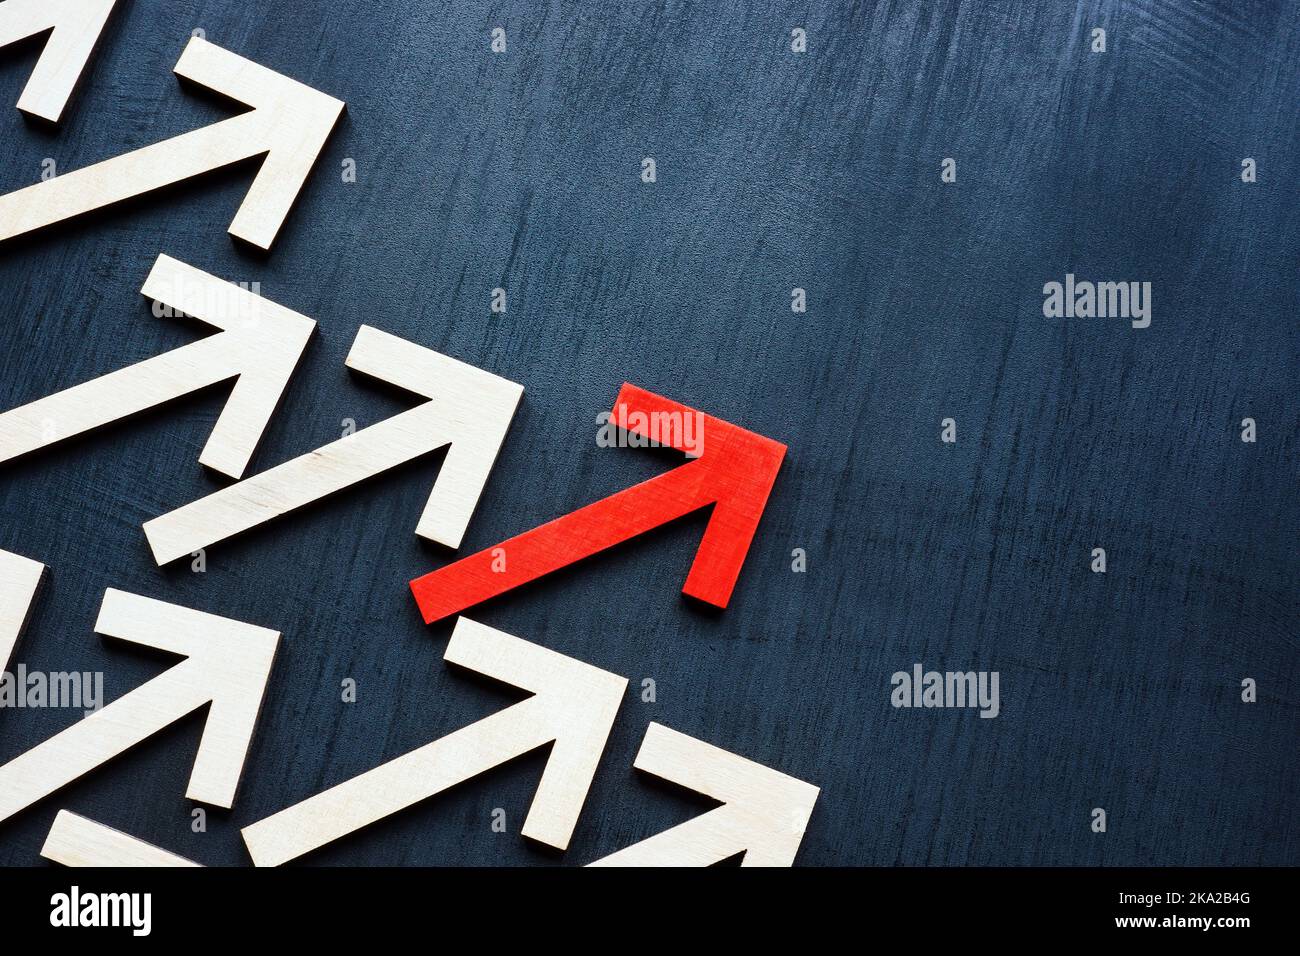 Business leadership concept. Arrows and one red in front. Stock Photo